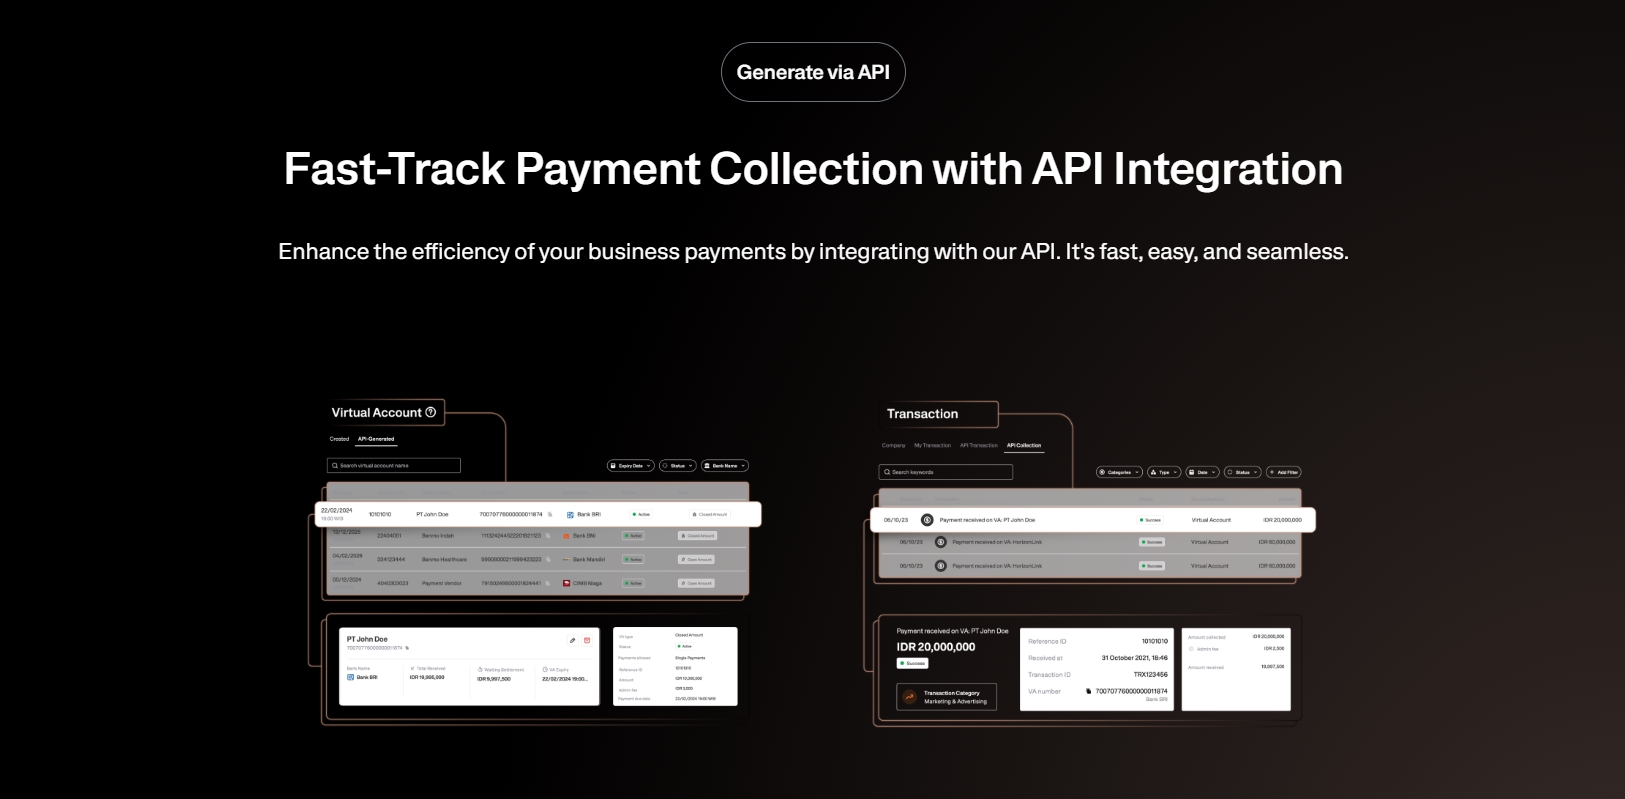 Fast-Track Payment Collection with API Integration